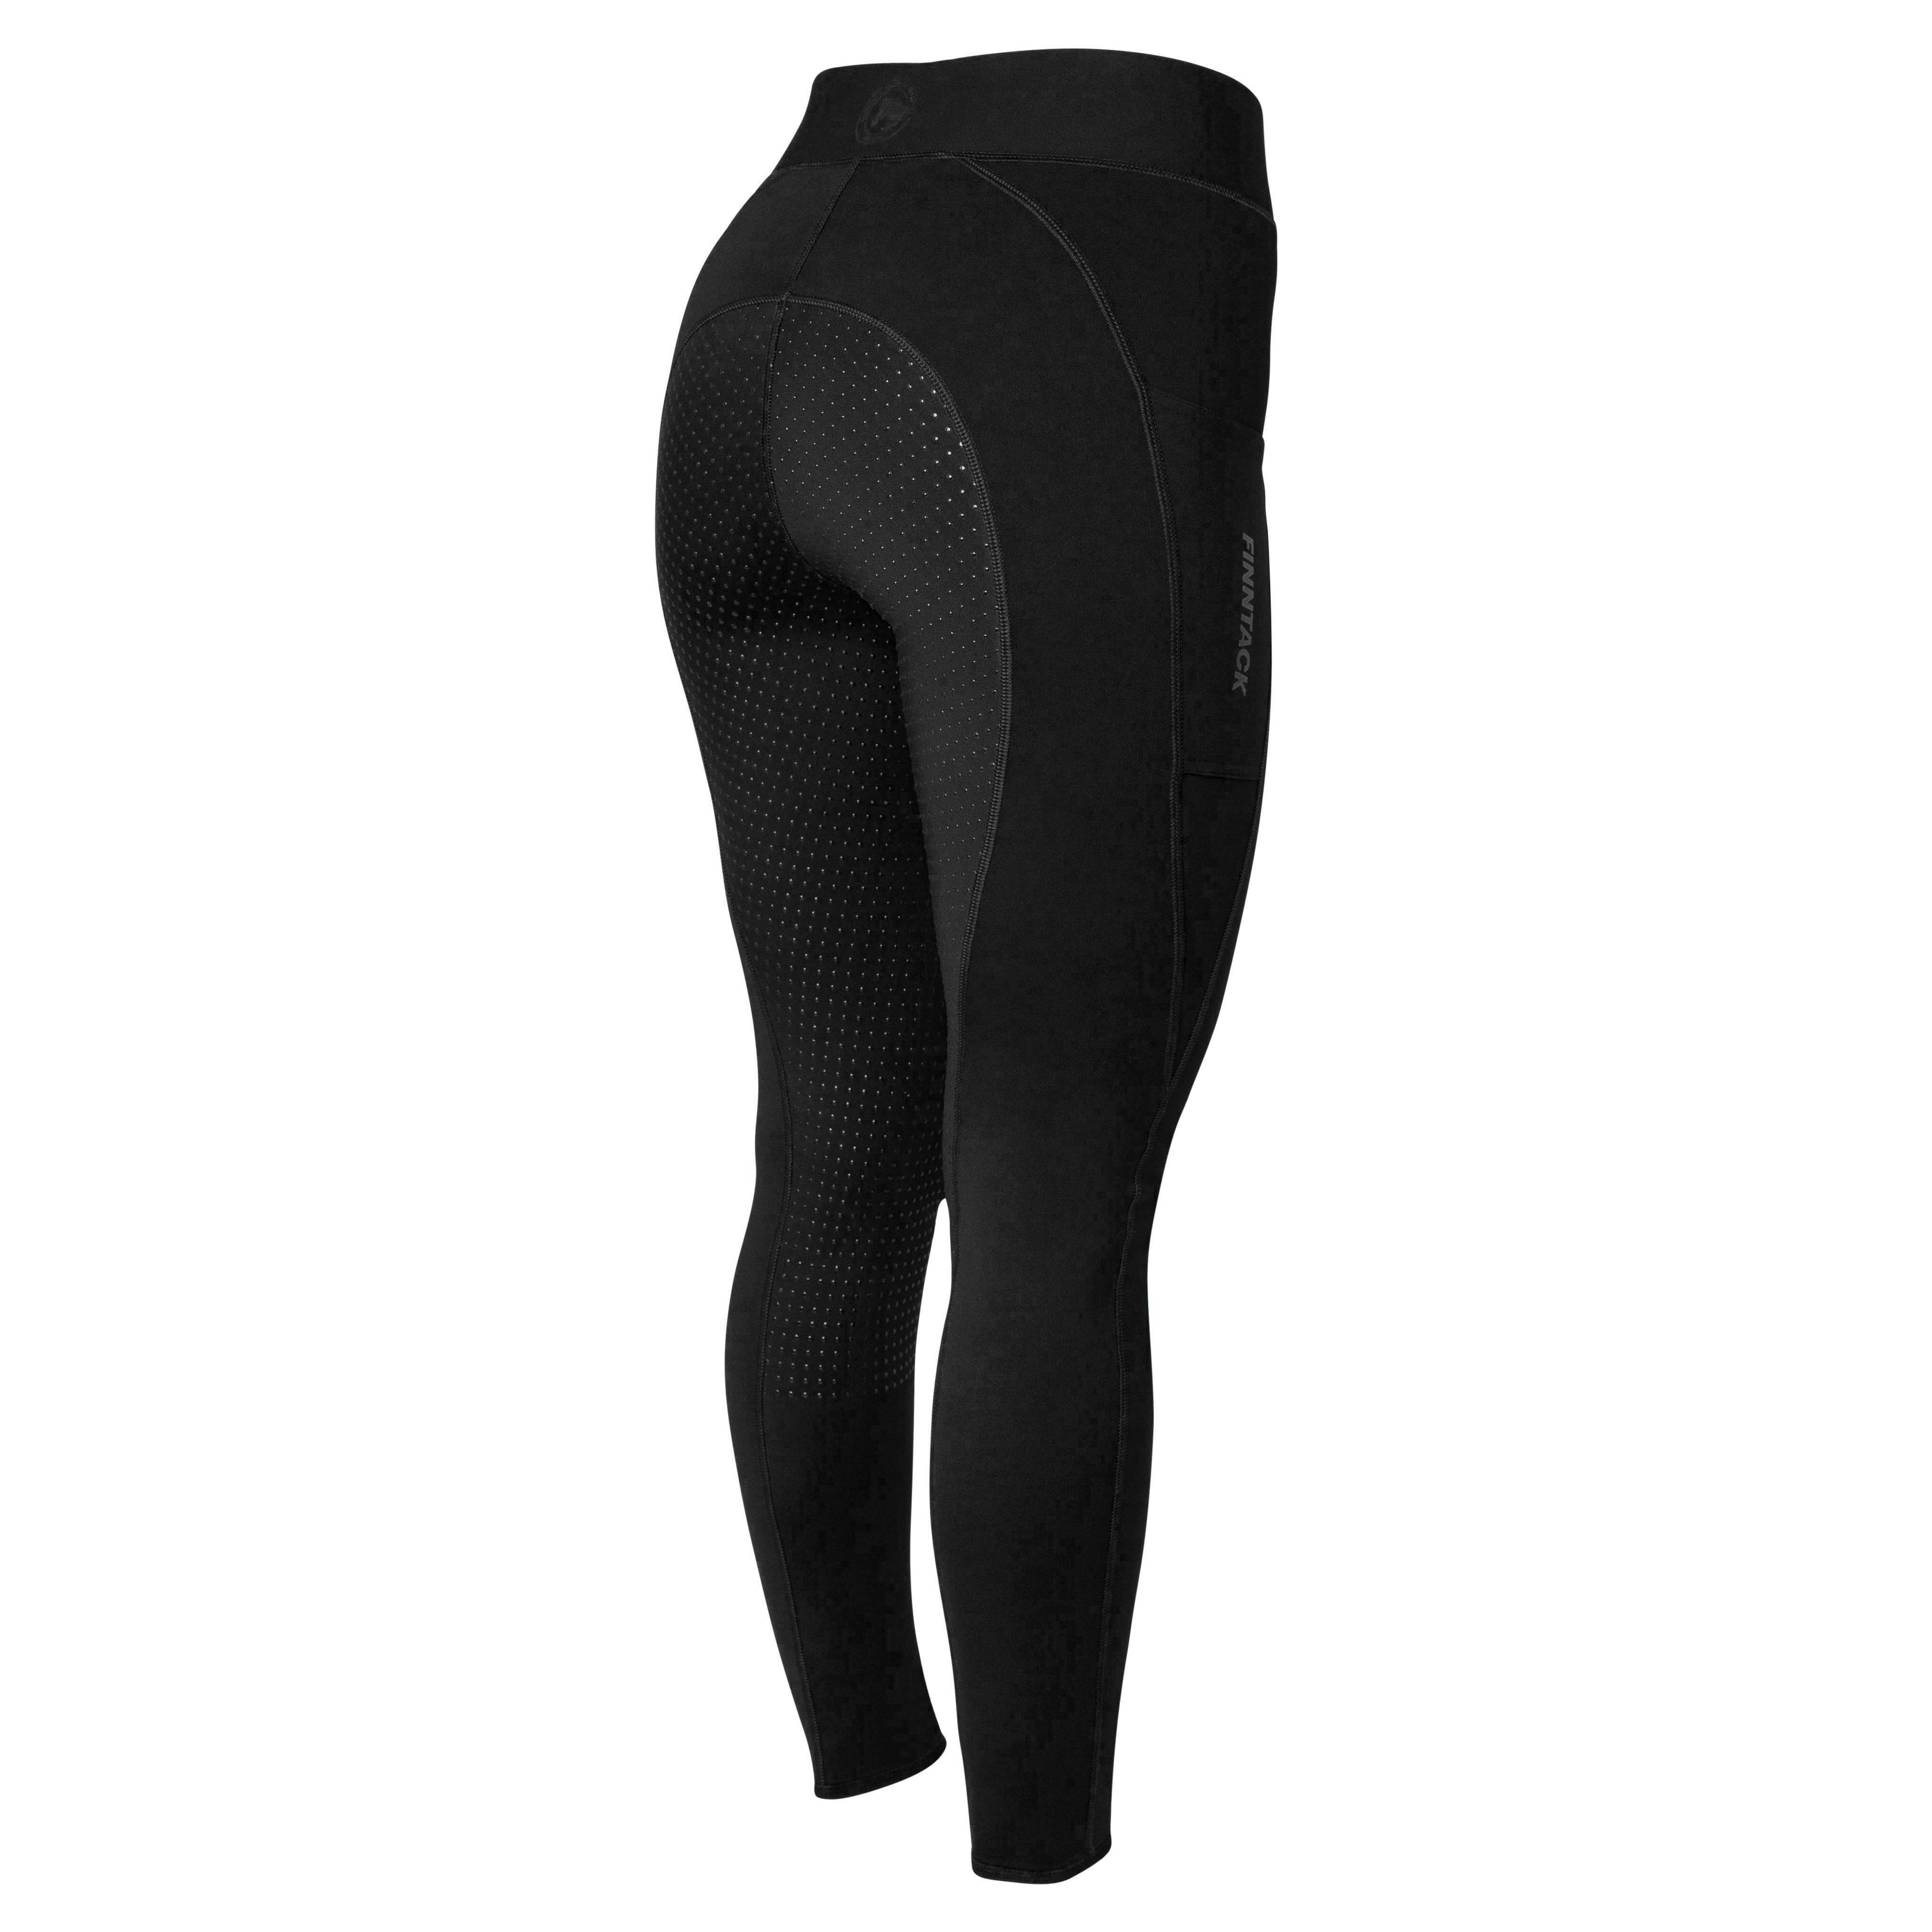 Finntack Riding Tights with mobile phone pocket